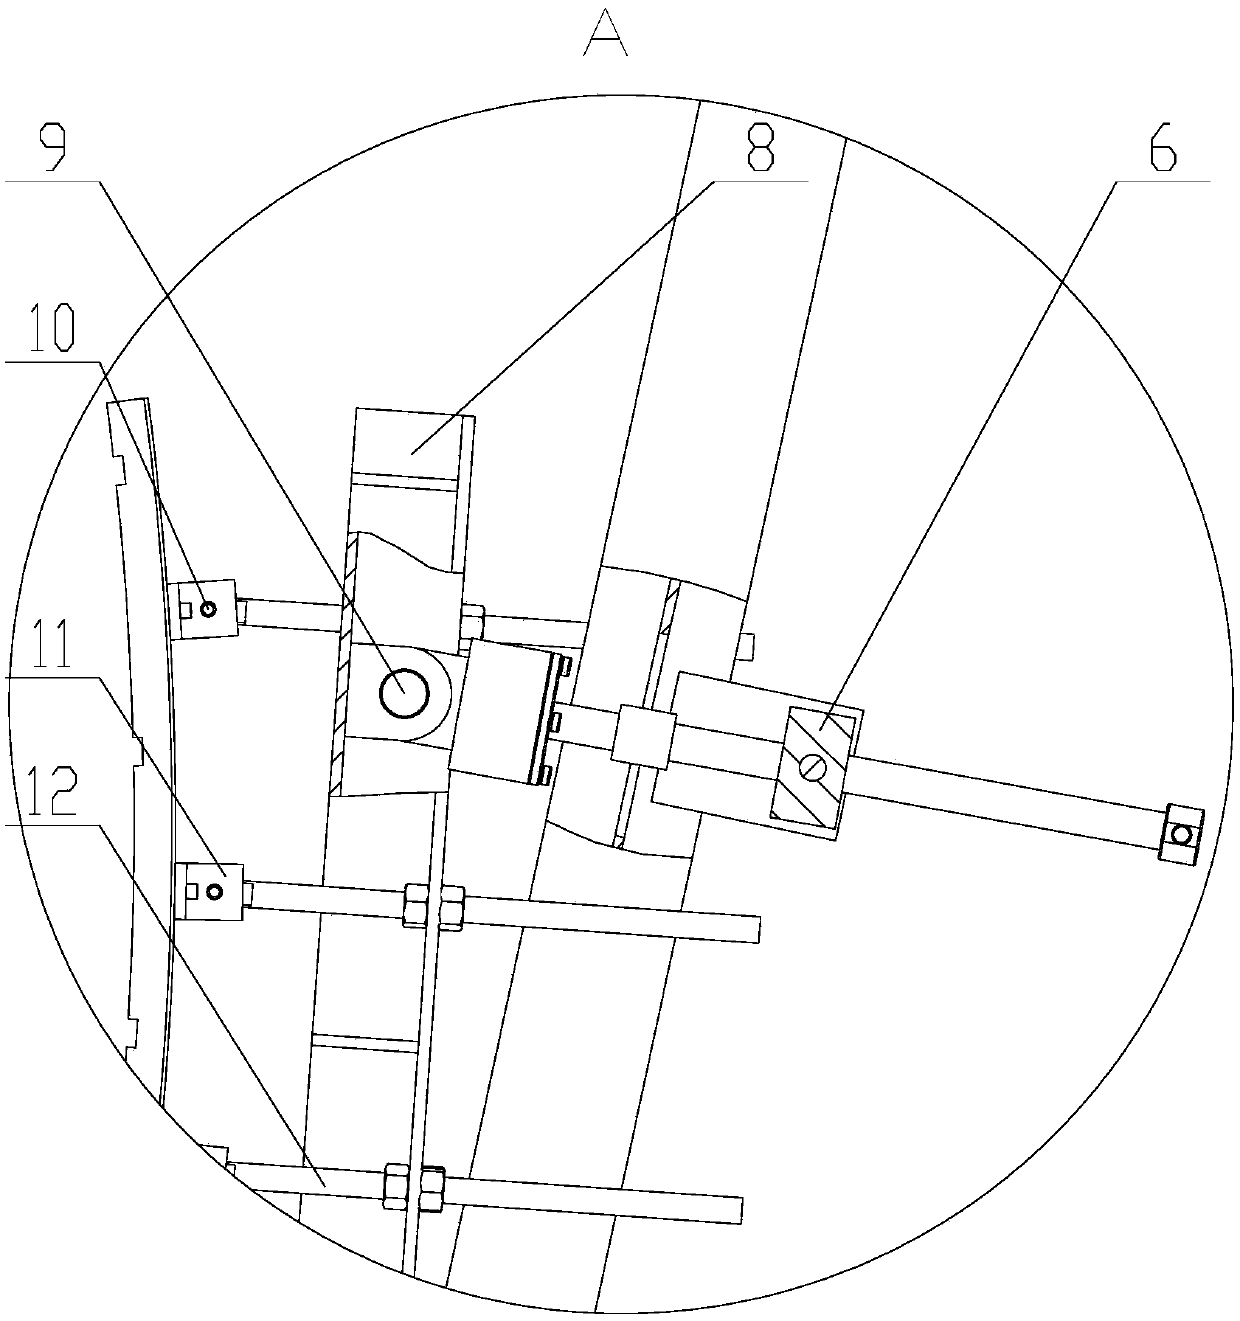 Automatically-overturning clamping device for wind power blades